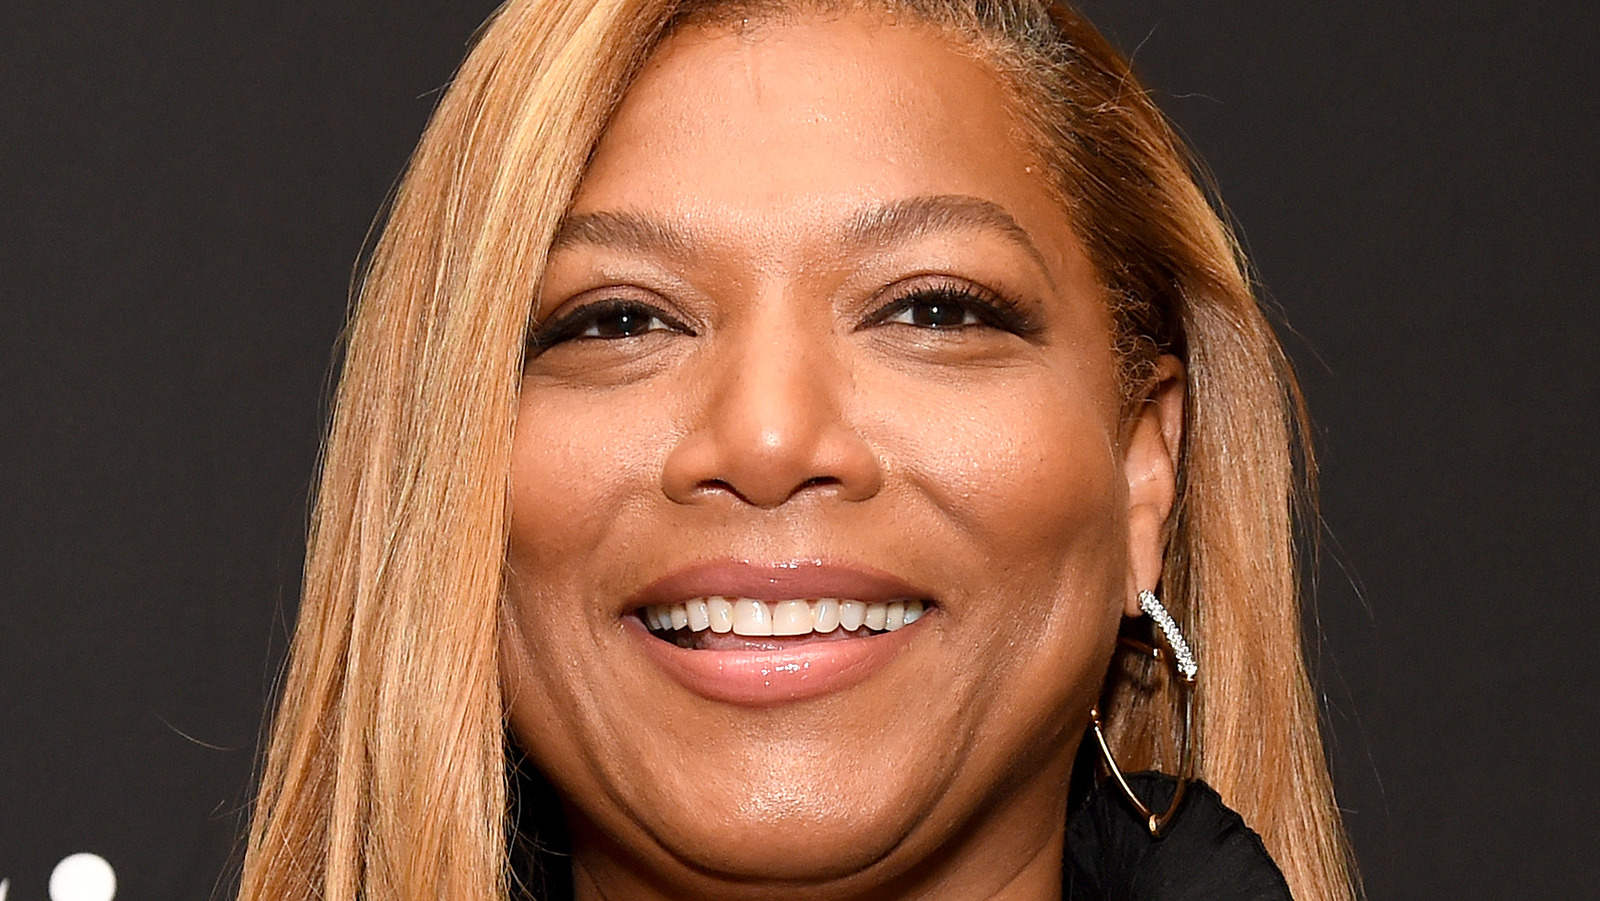 The Real Reason Queen Latifah Gave Up Relaxer And Switched To Natural Hair.